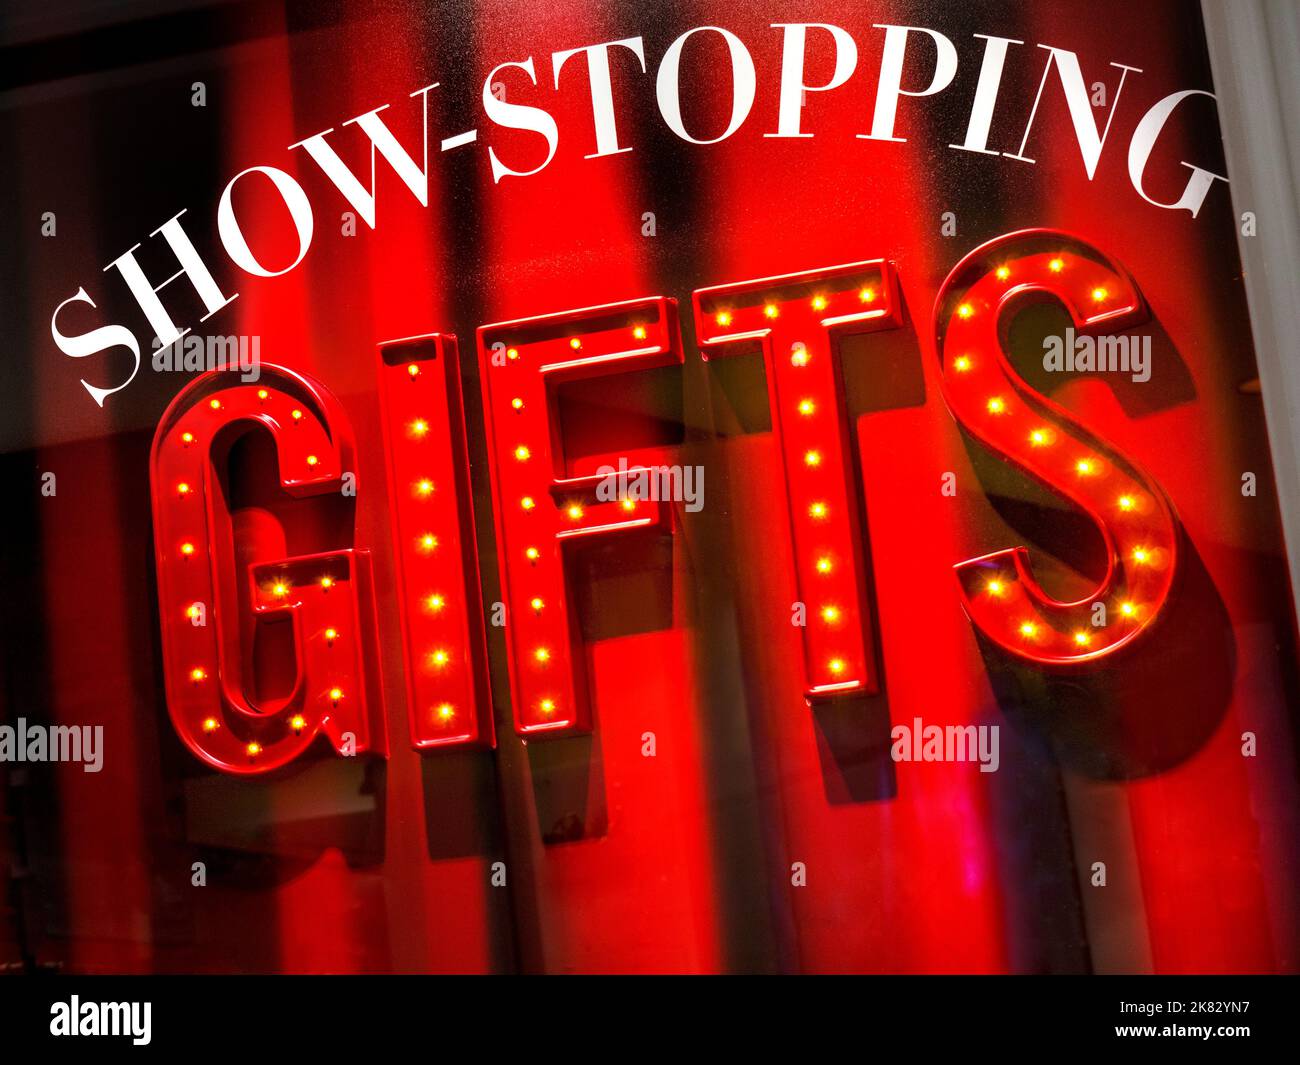 CHRISTMAS SHOPPING WINDOW SHOP STORE SIGN Graphic Christmas.shop window display 'Show-stopping GIFTS' Stock Photo